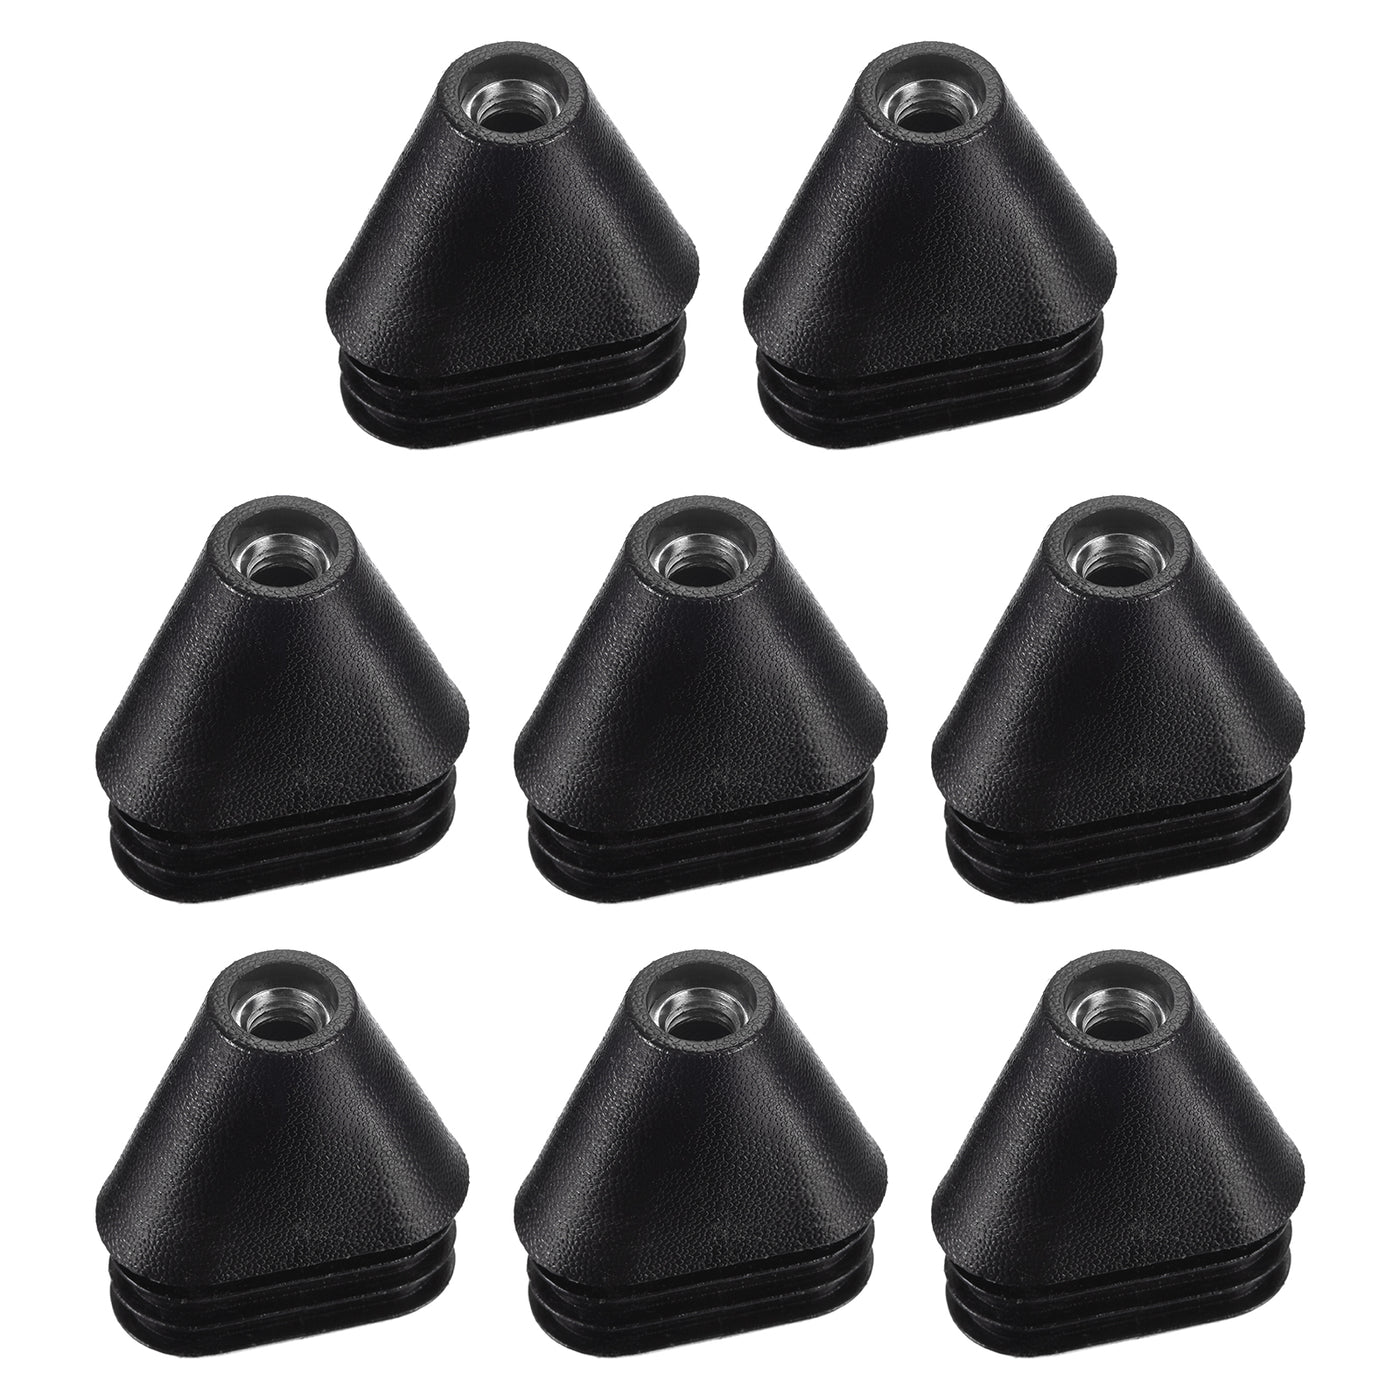 uxcell Uxcell 8Pcs 1.57"x0.79" Caster Insert with Thread, M8 Thread for Furniture